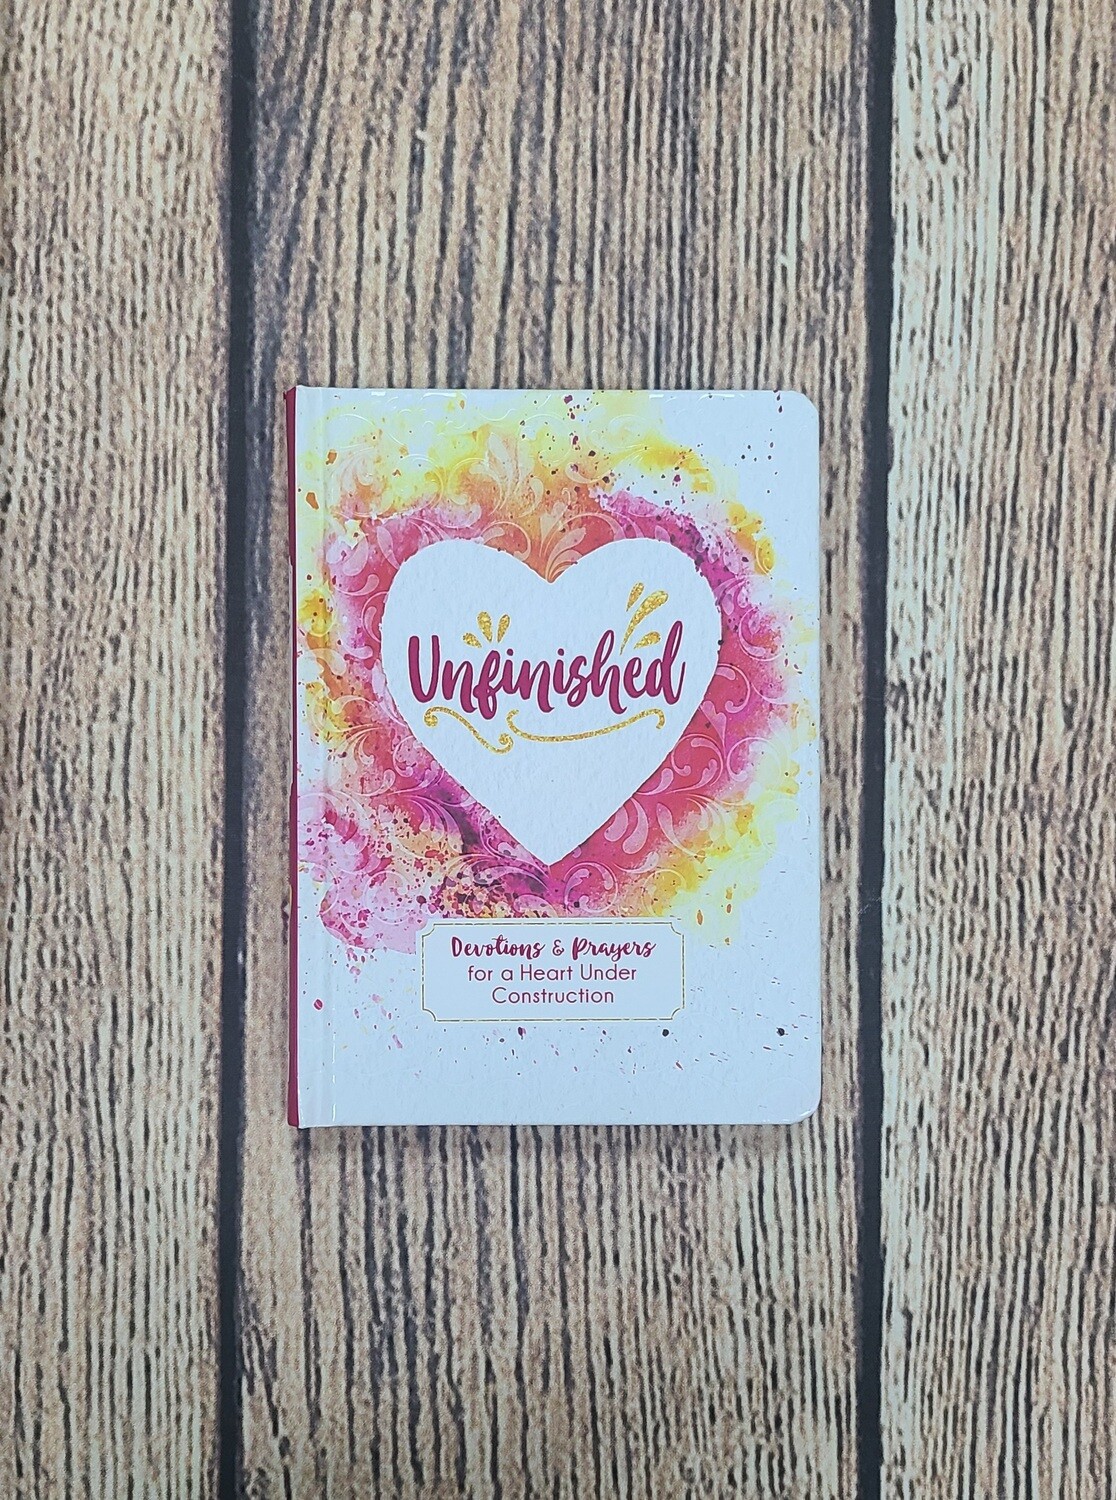 Unfinished: Devotions and Prayers for a Heart Under Construction by Linda Hang